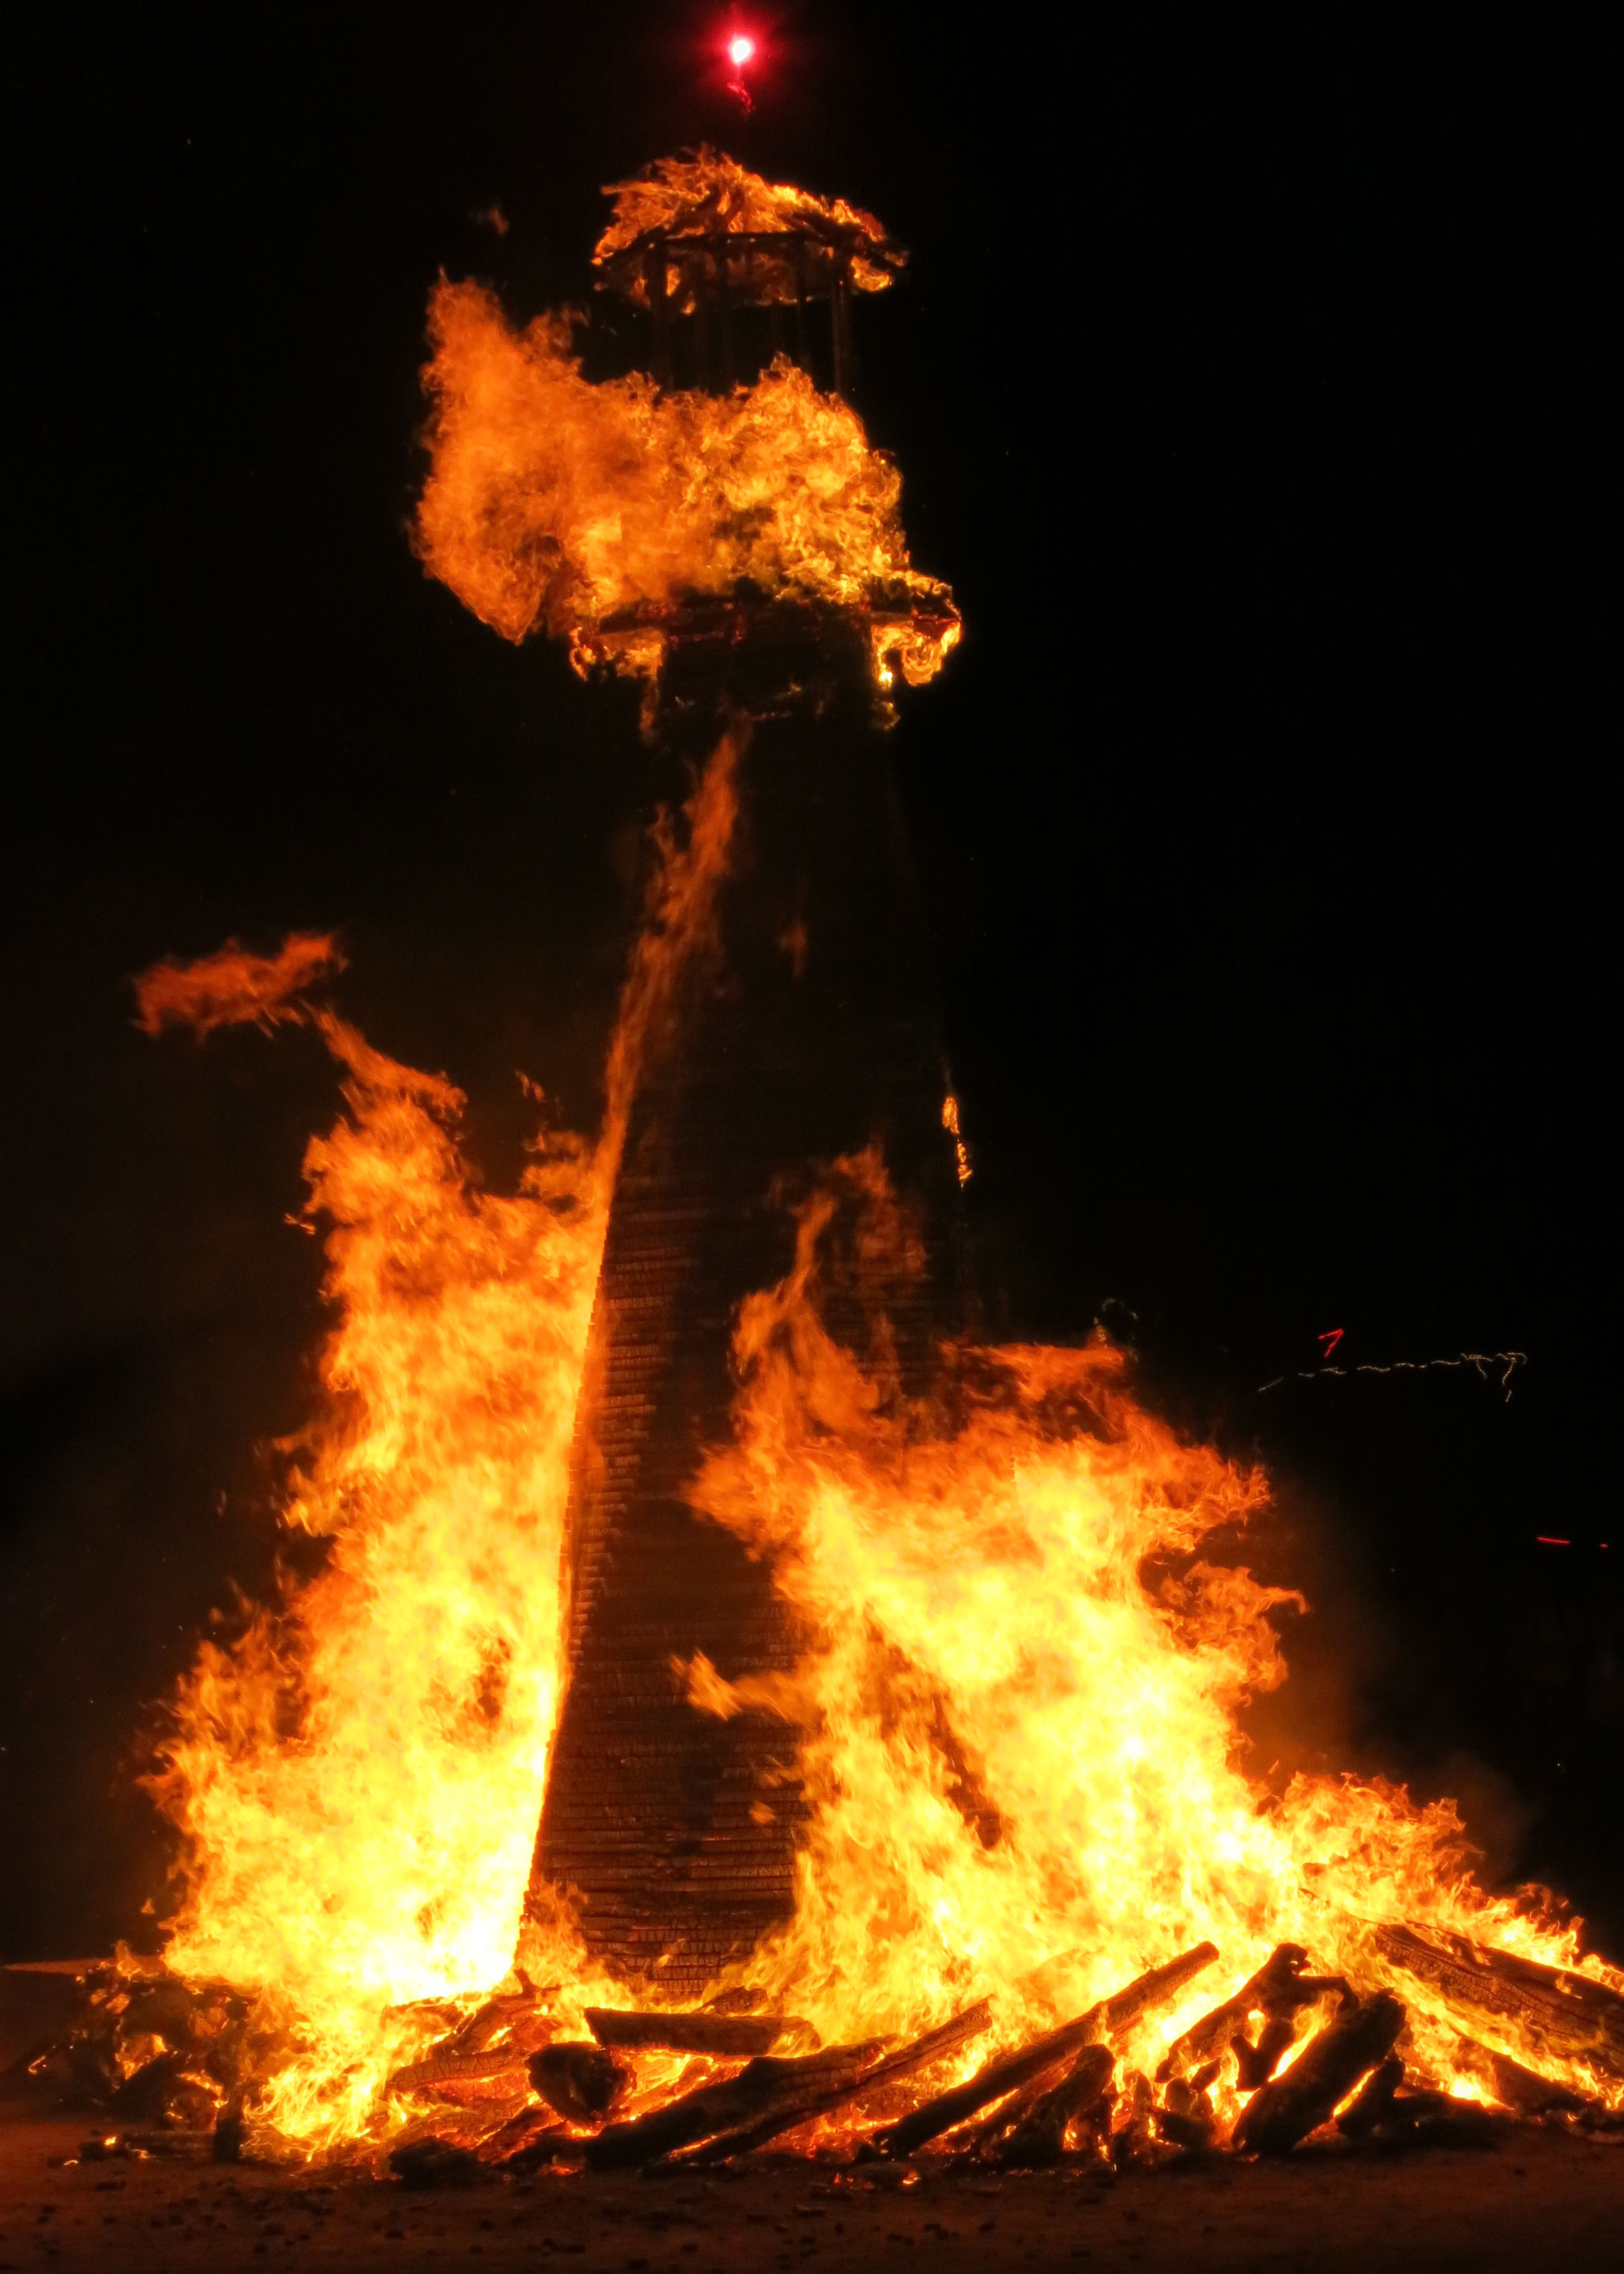 The burning of the Man provides Burning Man with its name, but there are many other burns. This was a light house created by burners from the North Coast of California. Last year over 20 regional art pieces were burned simultaneously on Thursday night.